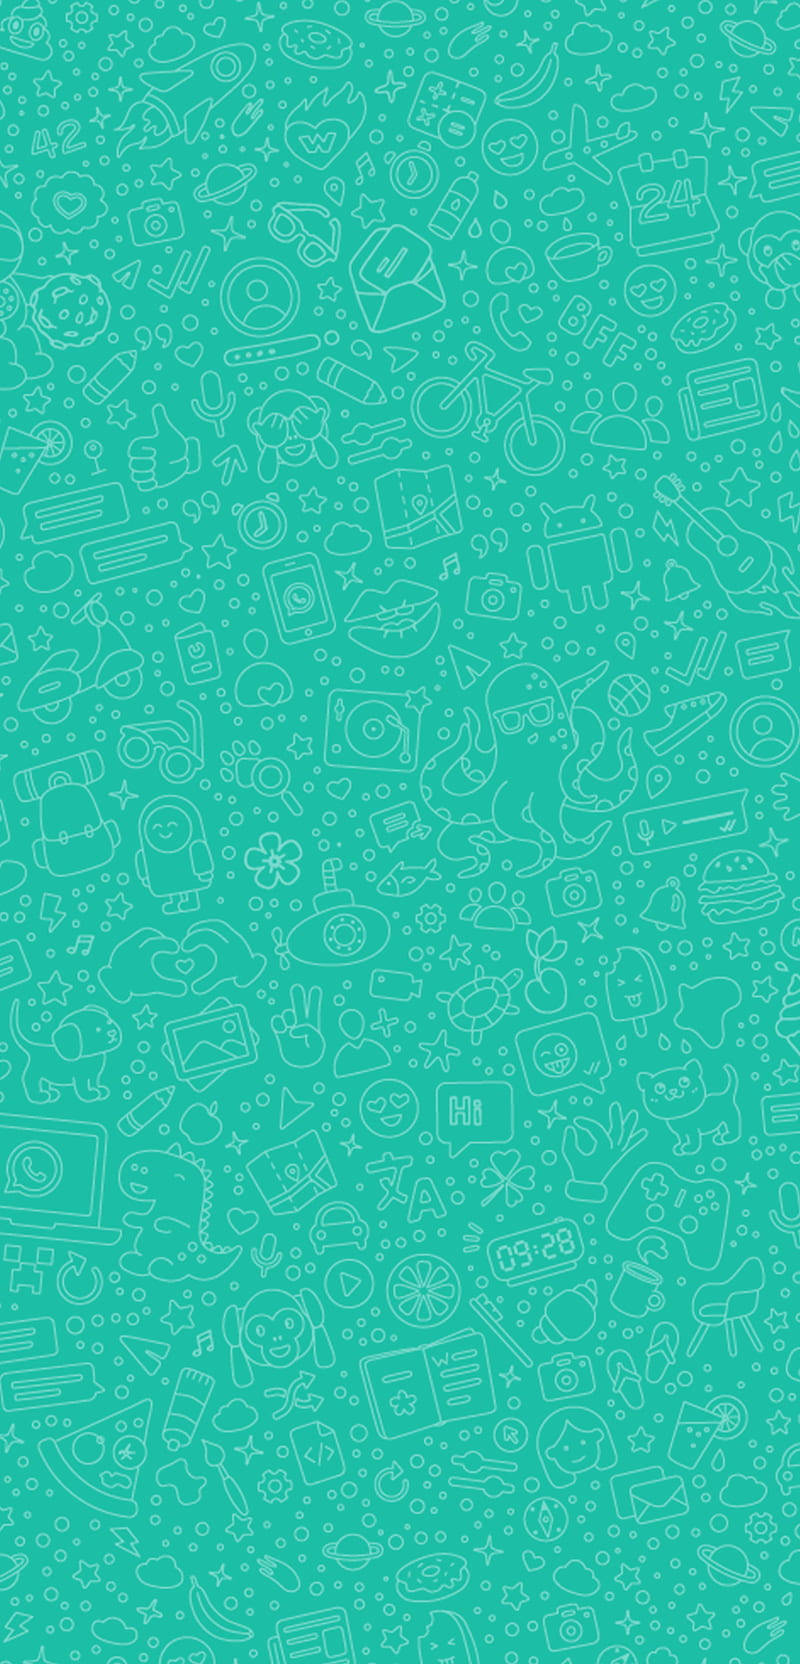 Whatsapp Chat Doodle Patterns Background